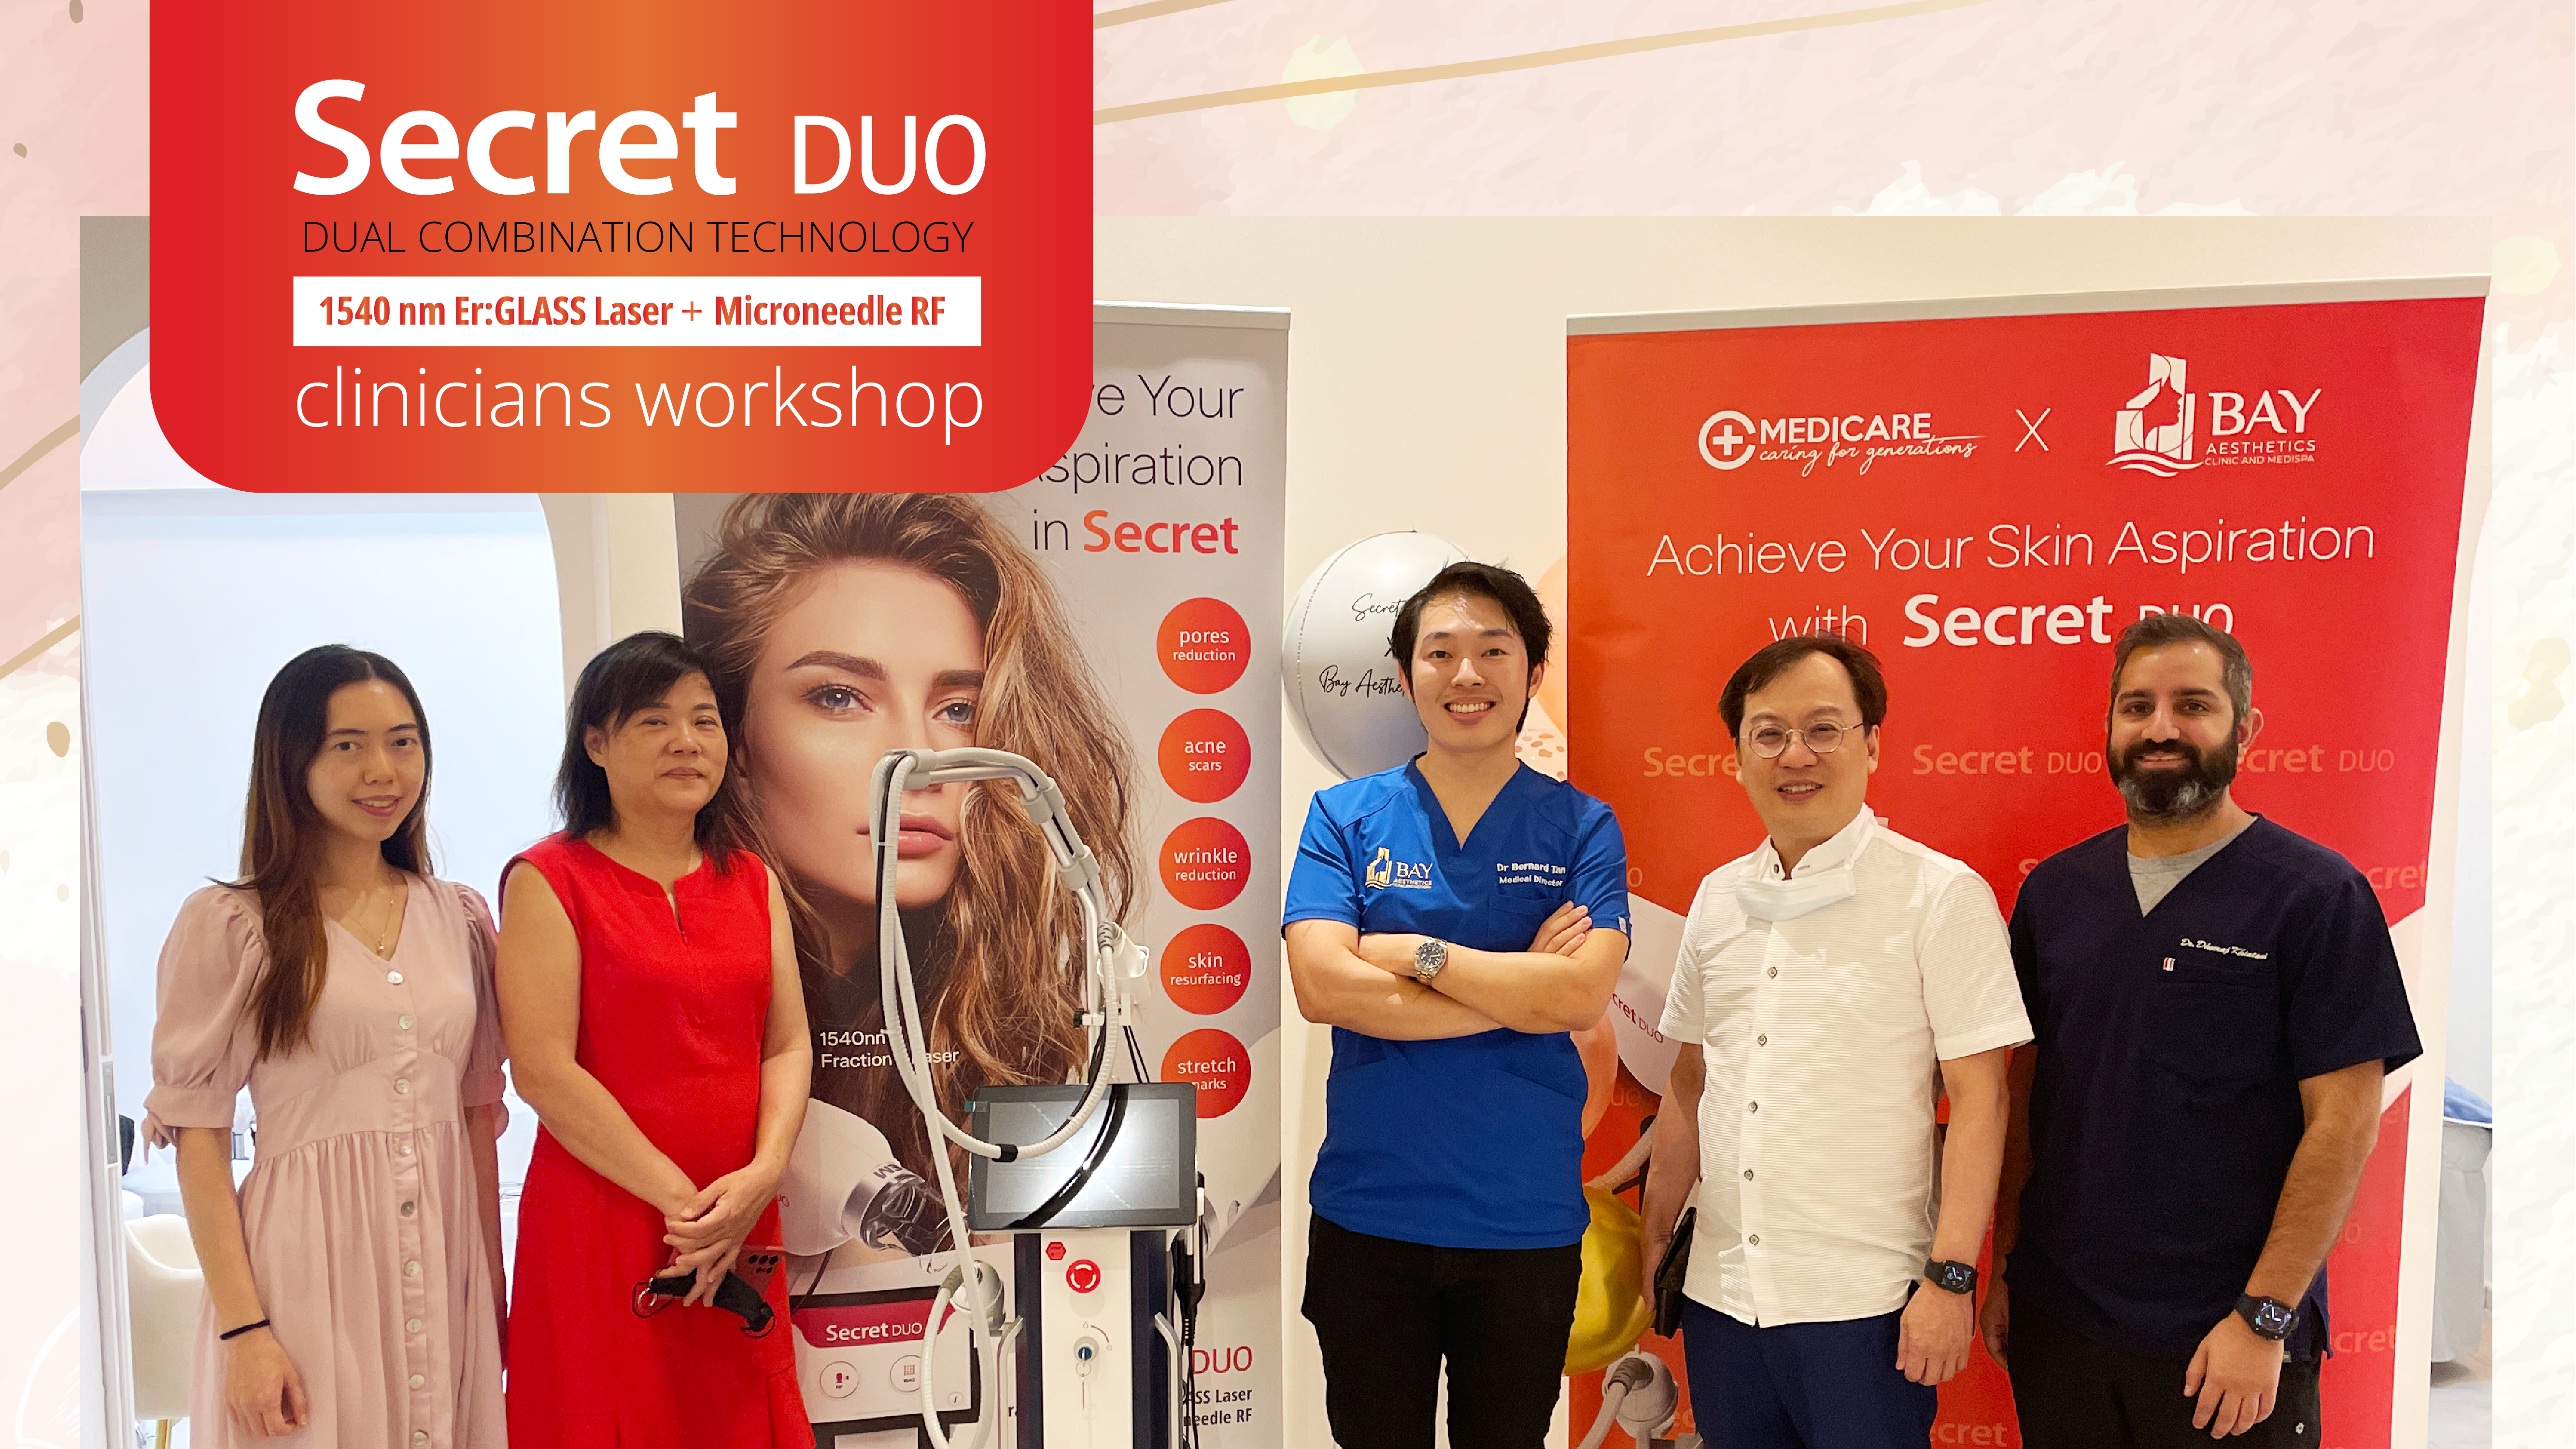 Secret DUO Workshop at Bay Clinic